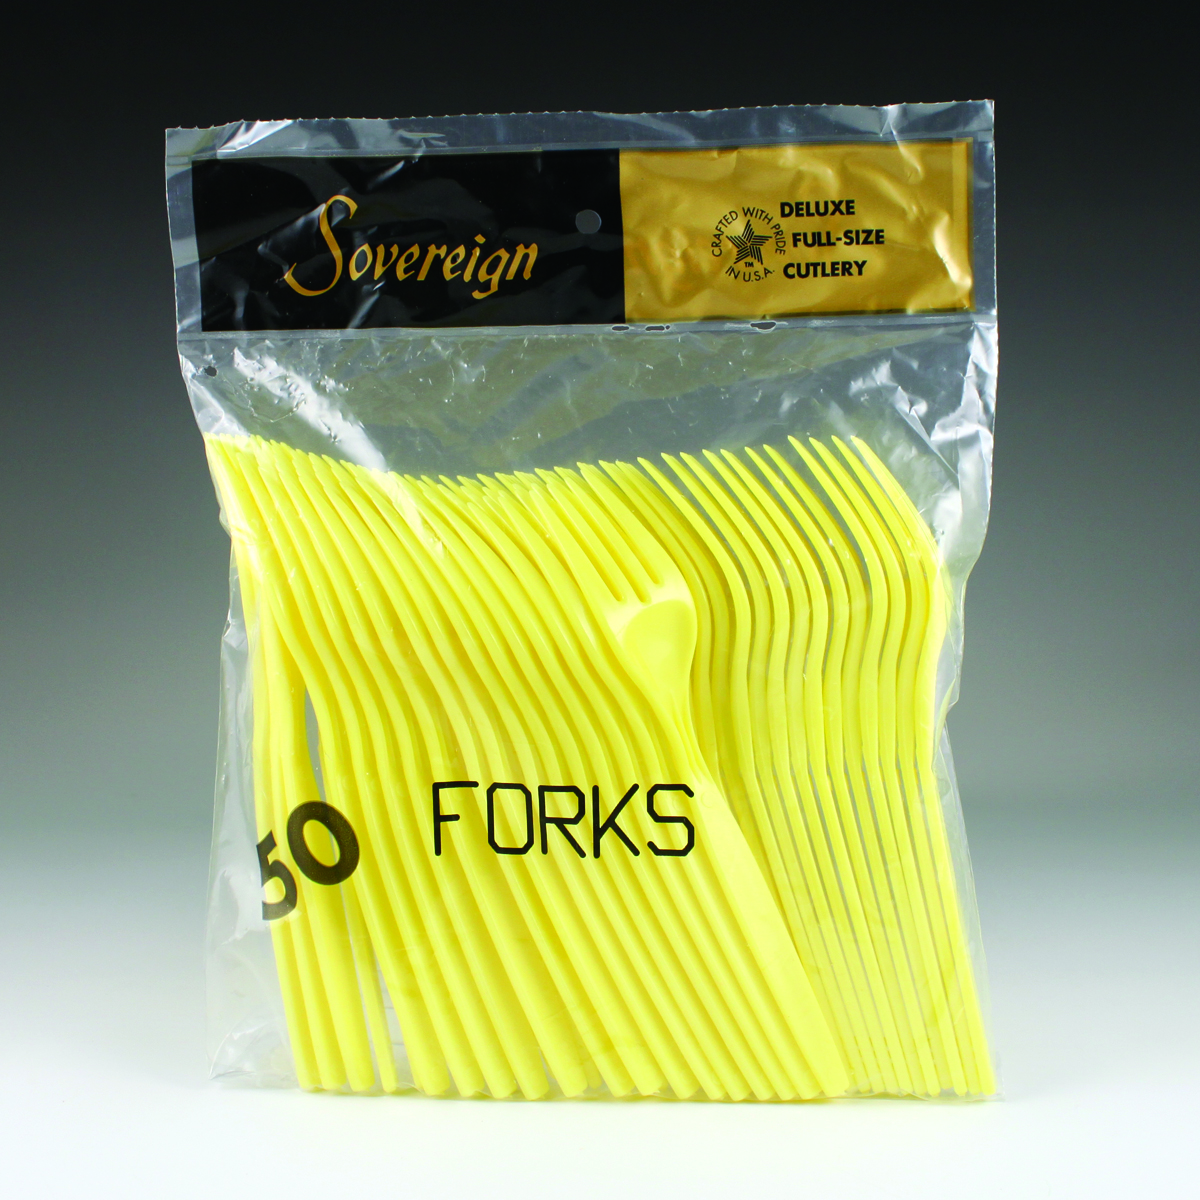 Sovereign Poly Bagged (50 Ct.) - Forks